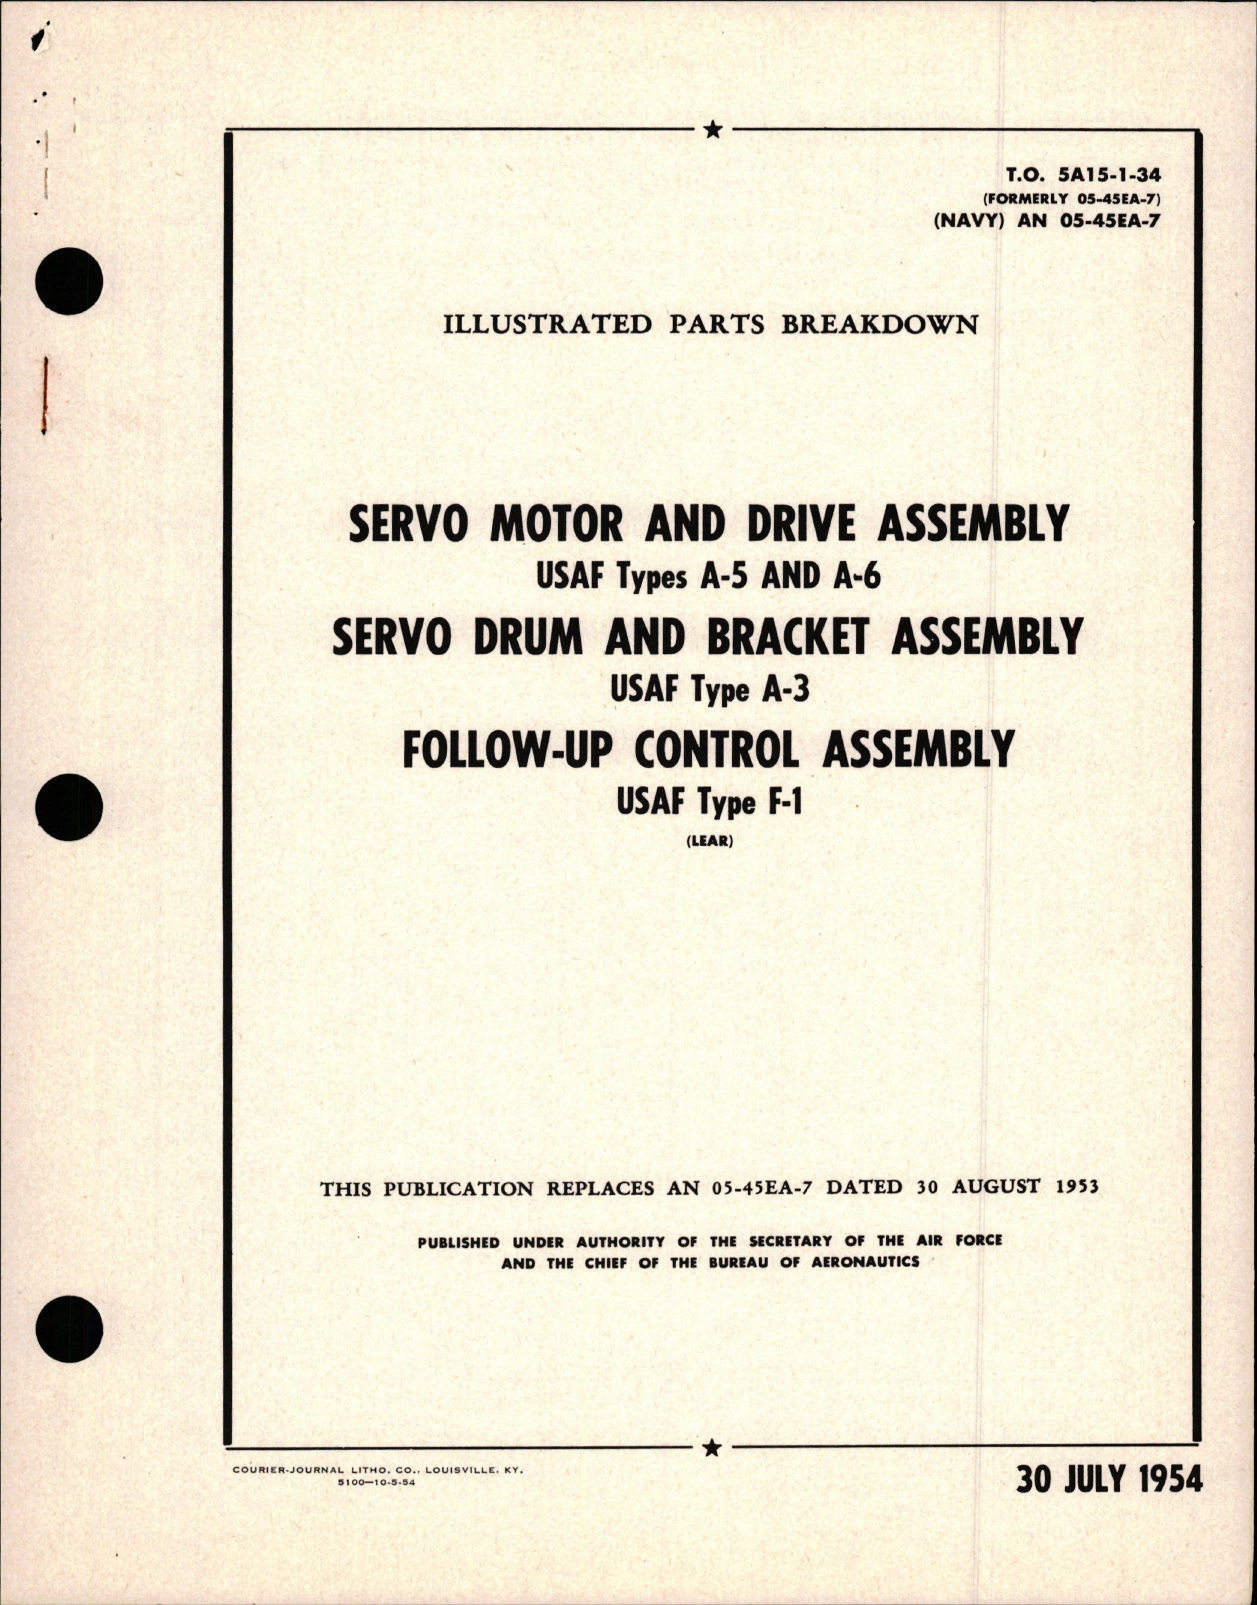 Sample page 1 from AirCorps Library document: Illustrated Parts for Servo Motor and Drive Assembly, Servo Drum and Bracket Assembly, Follow-Up Control Assembly 